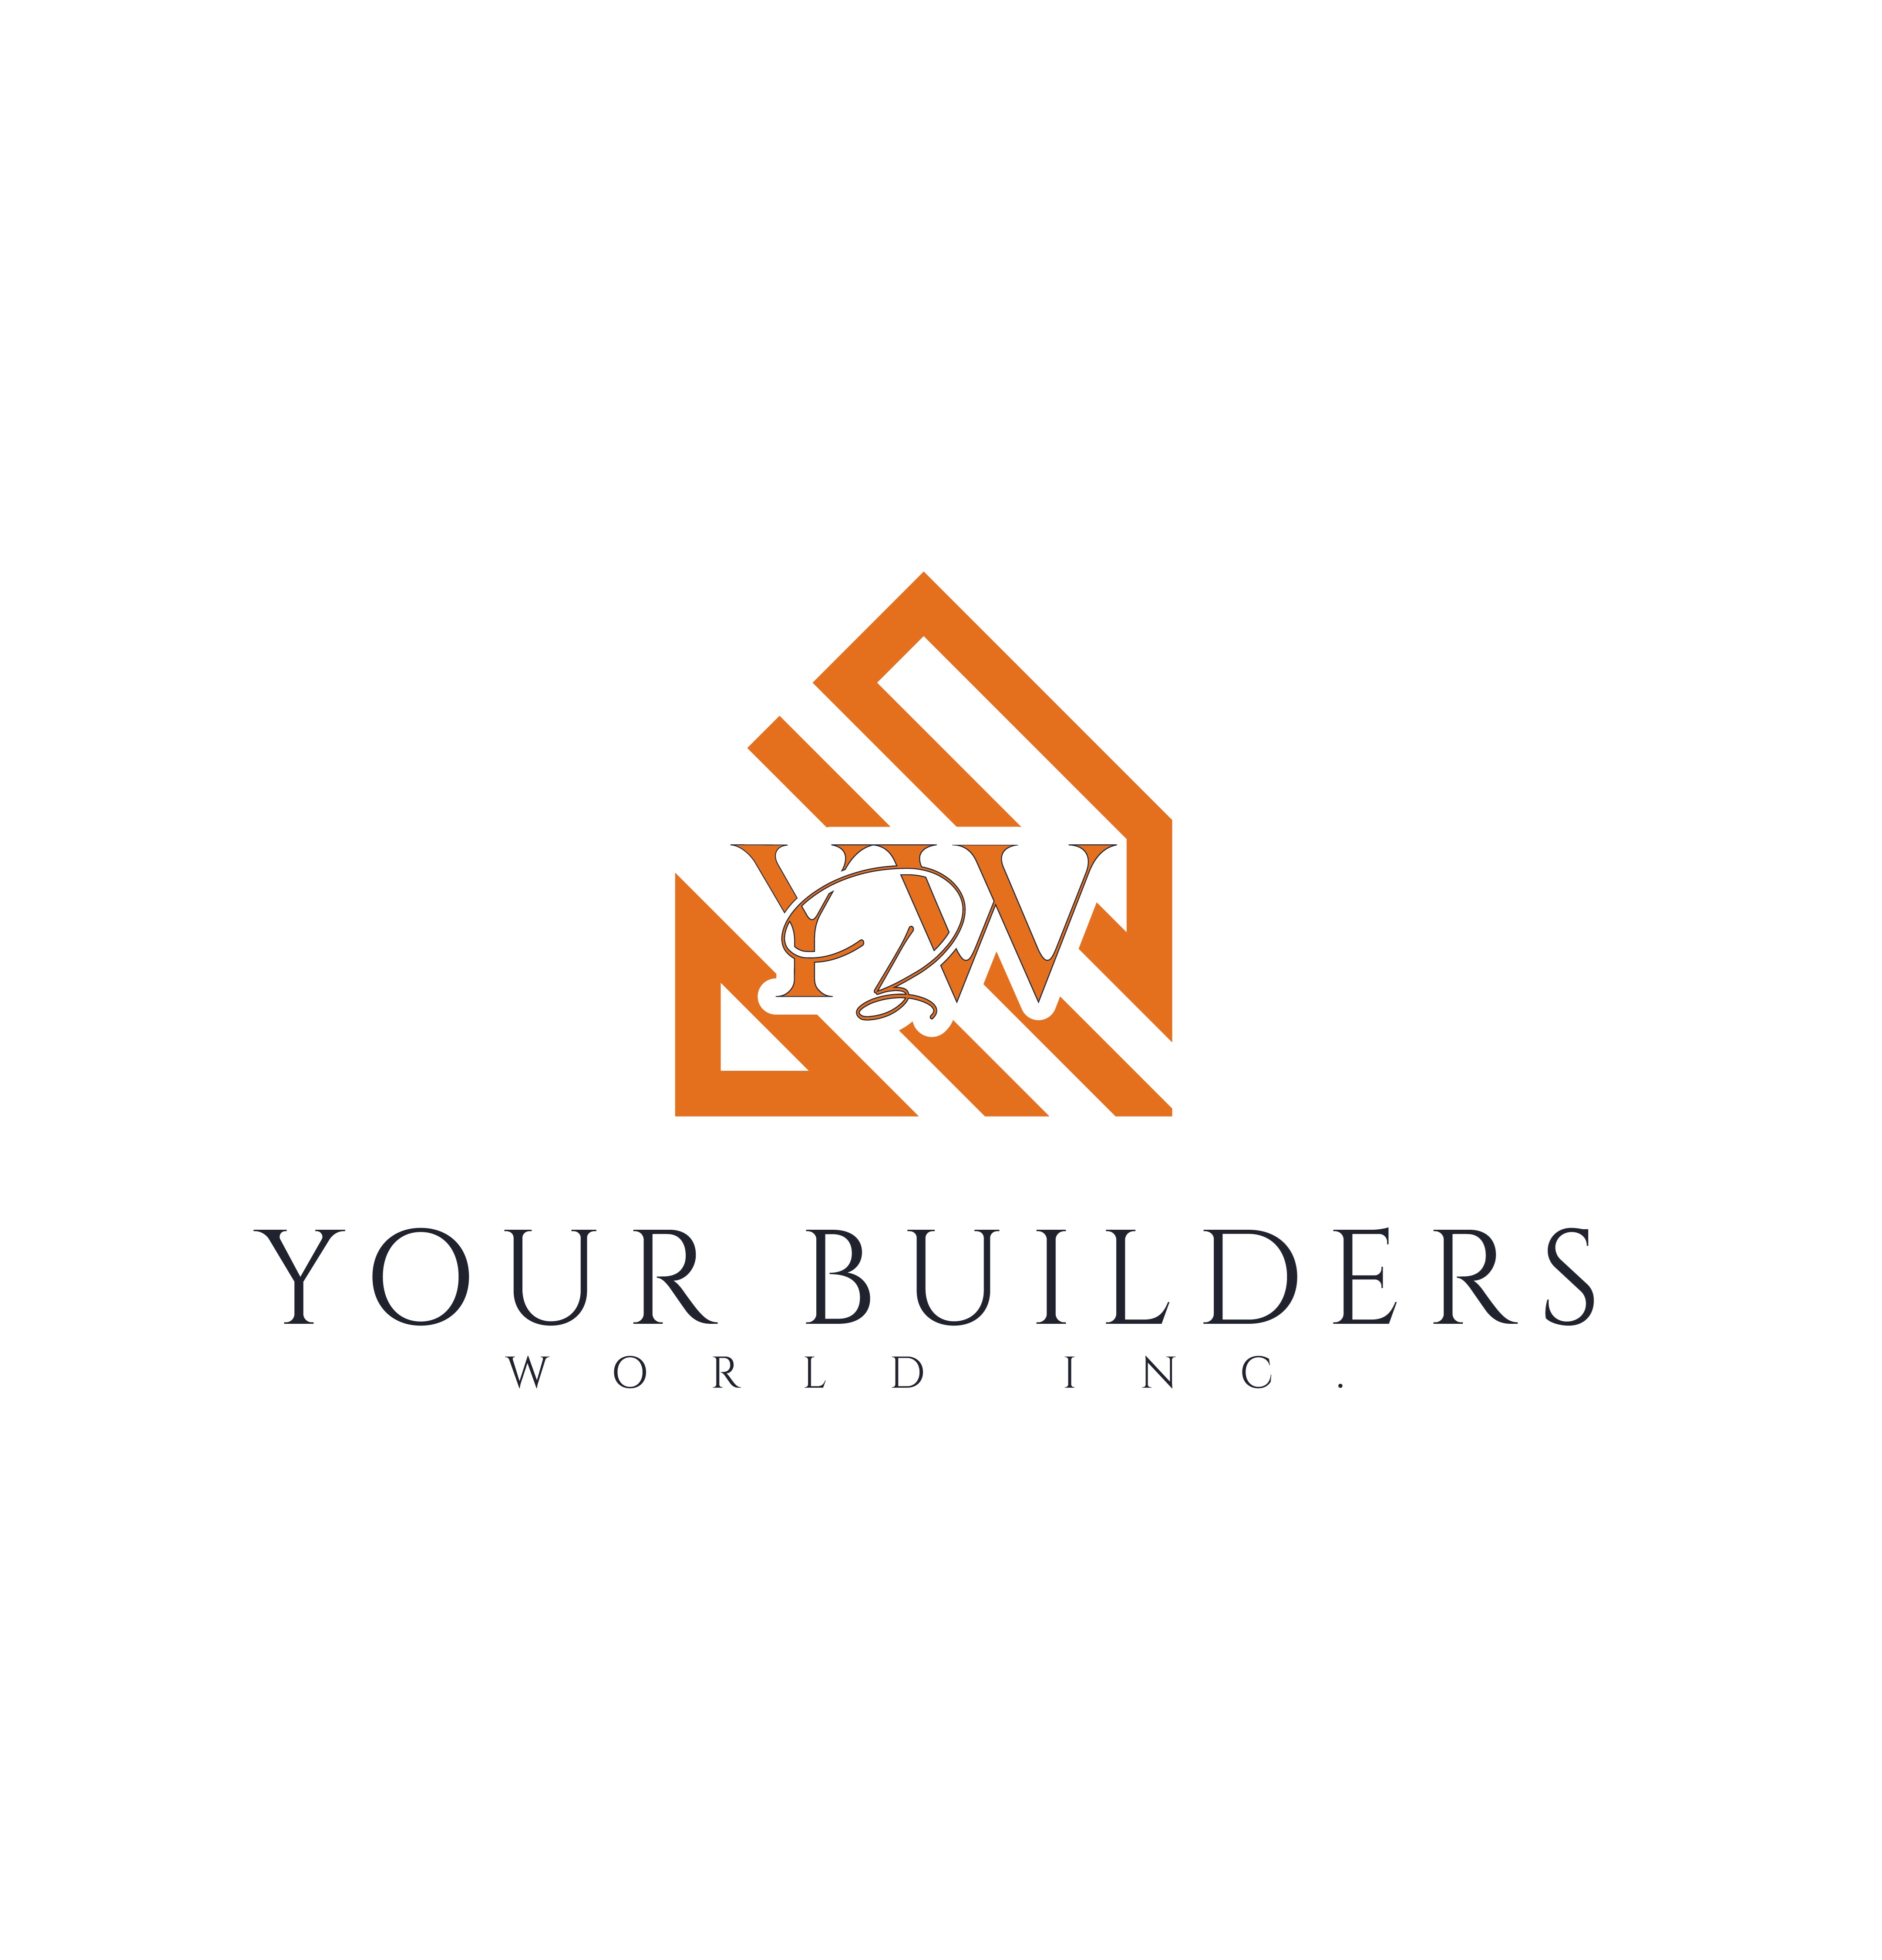 Your Builders World Inc.'s logo